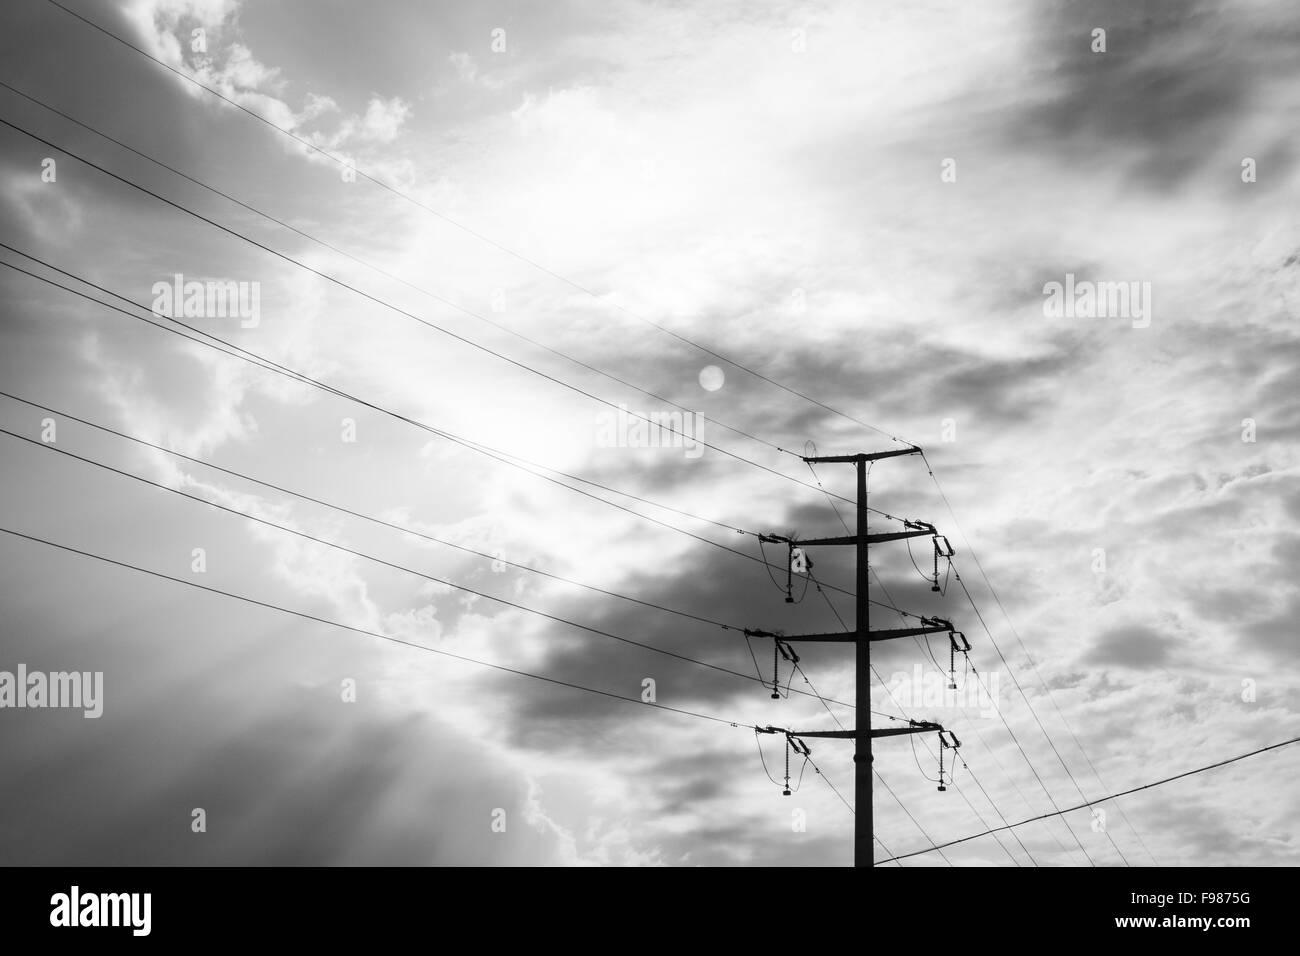 Power pole in threatening weather conditions, black clouds and the sun Stock Photo